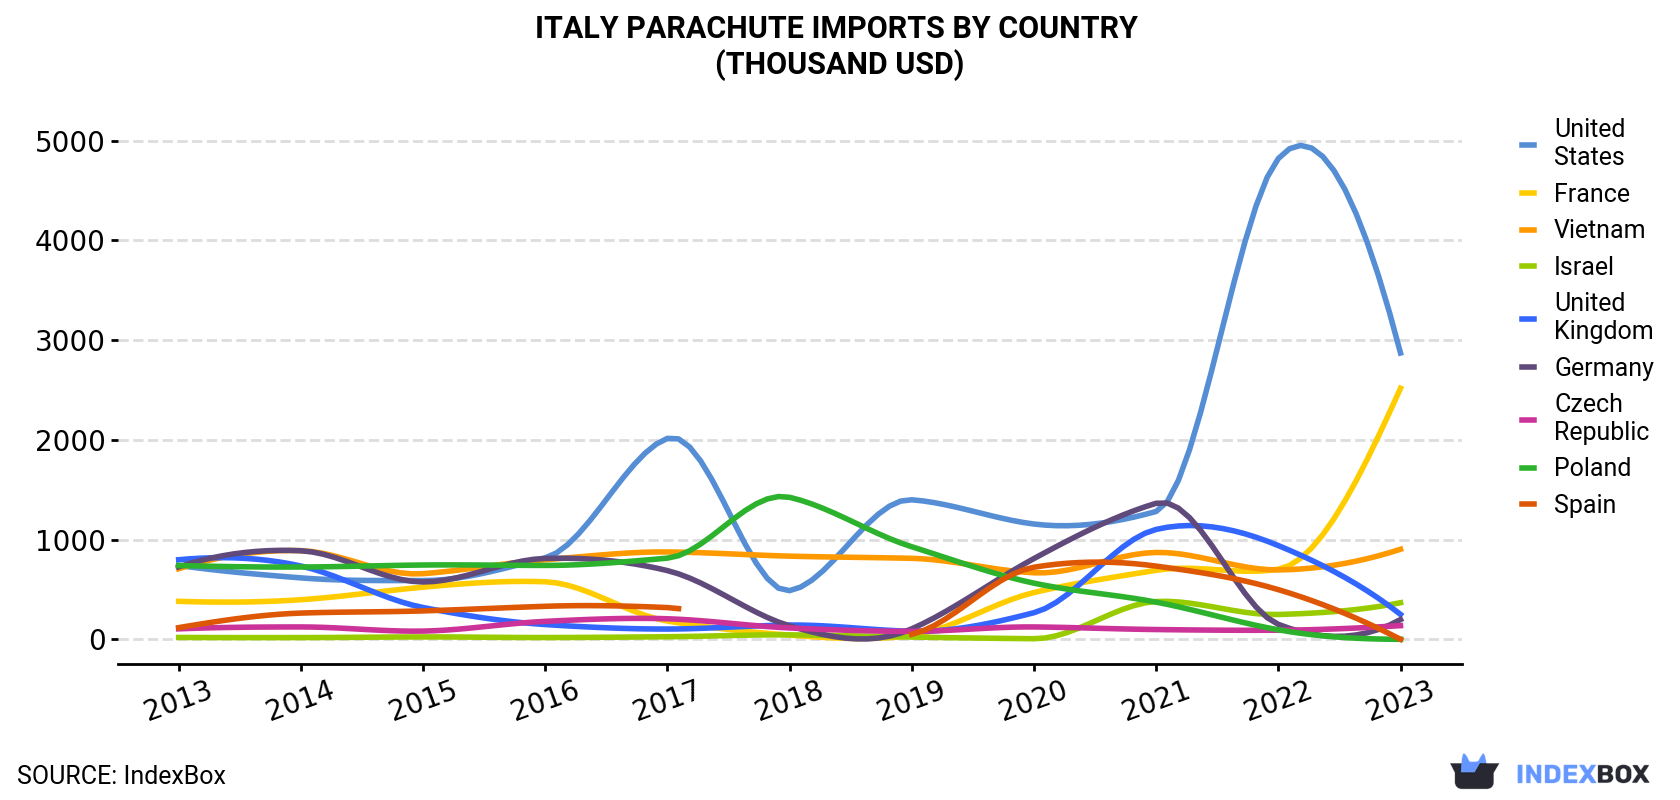 Italy Parachute Imports By Country (Thousand USD)